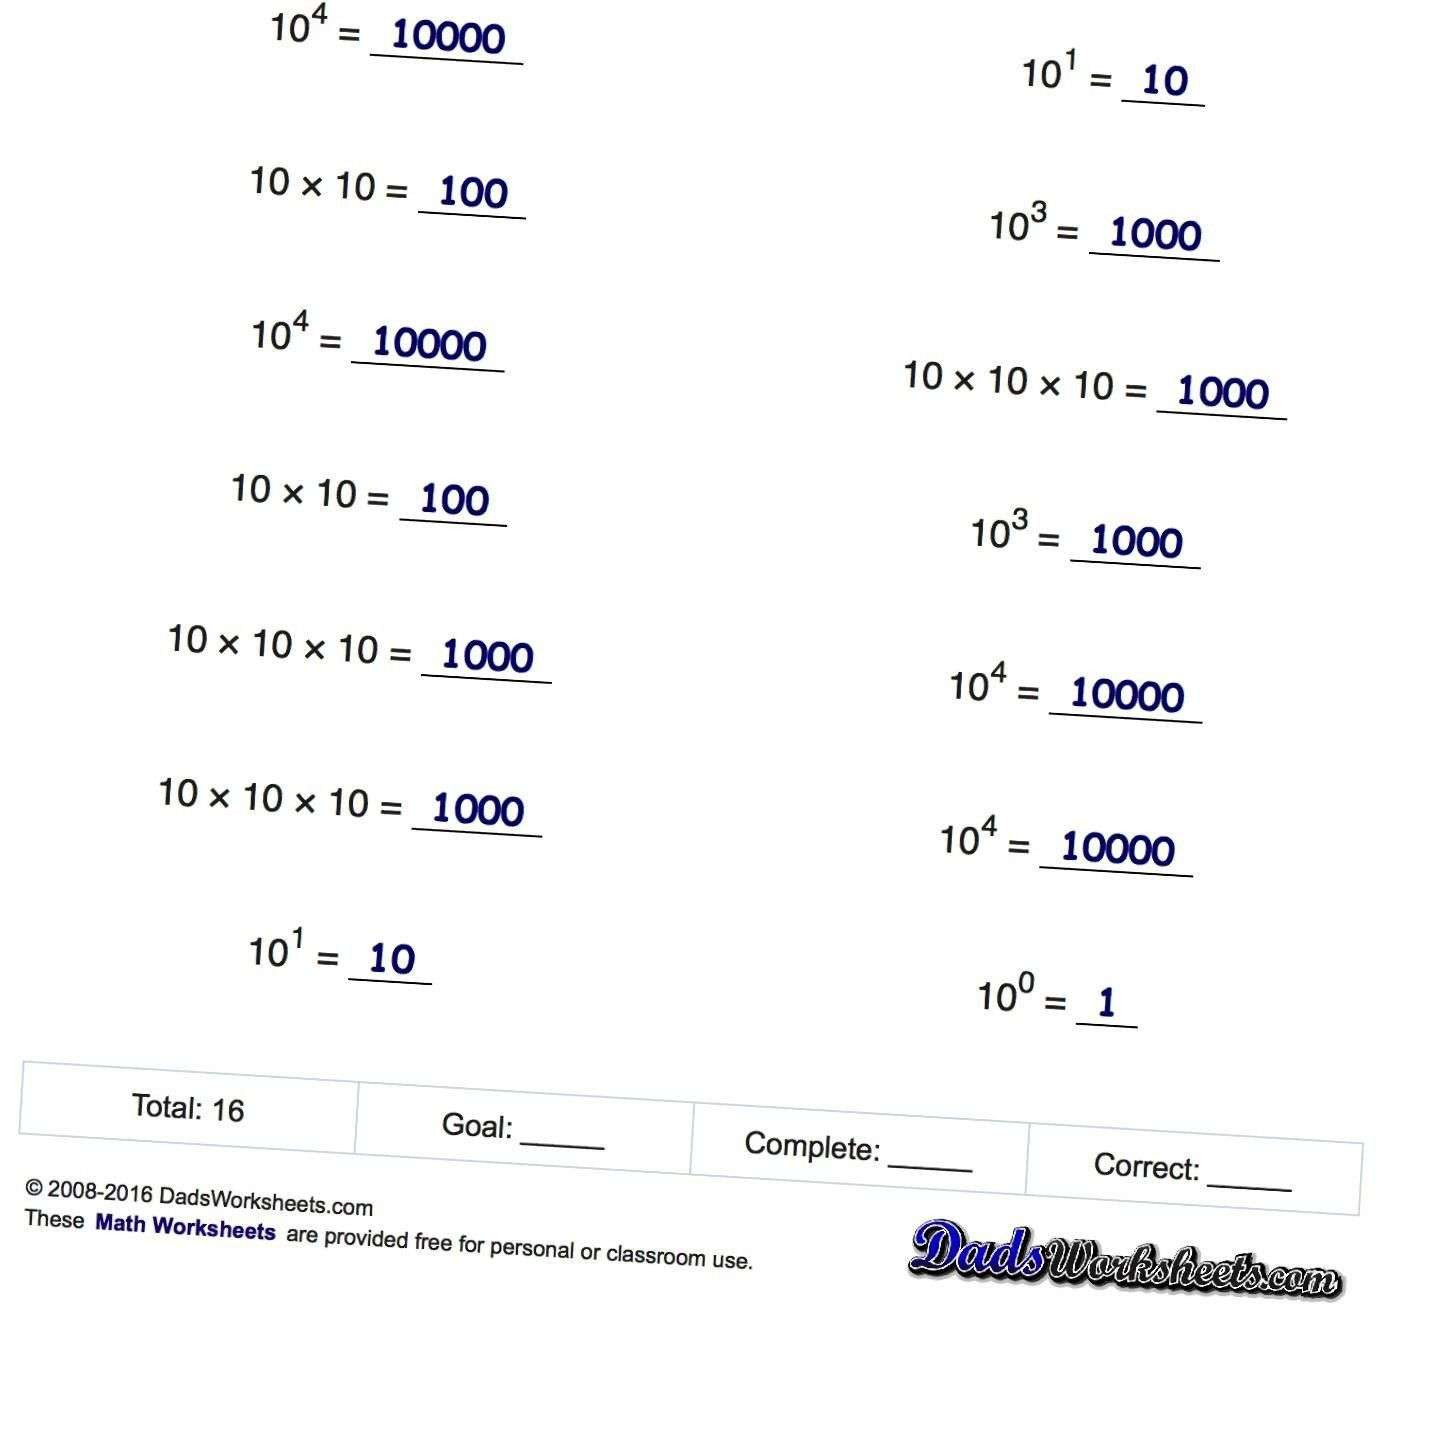 Scientific Notation And Significant Figures Worksheet